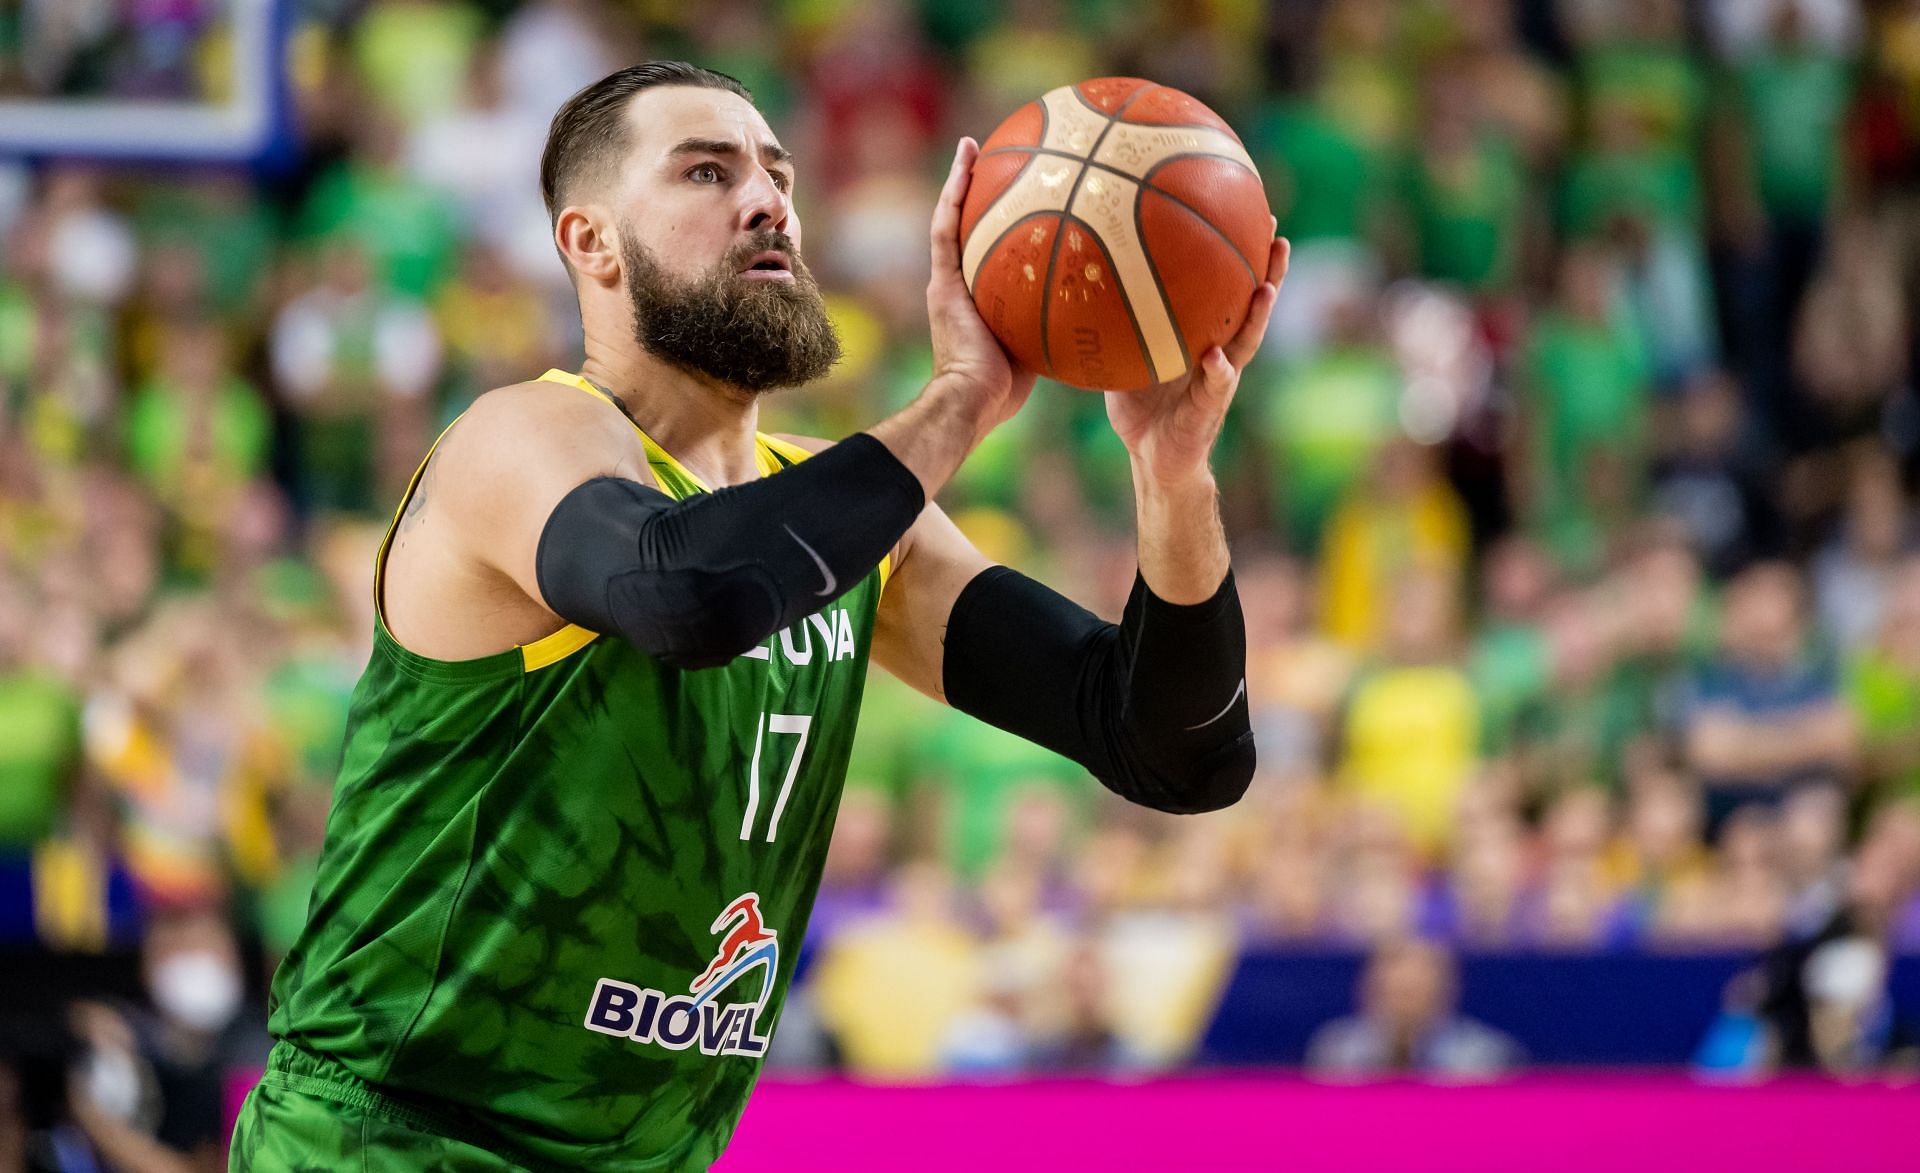 Latvia vs Lithuania FIBA World Cup 2023 tuneup, August 22 Date, time, where to watch, live stream details and more